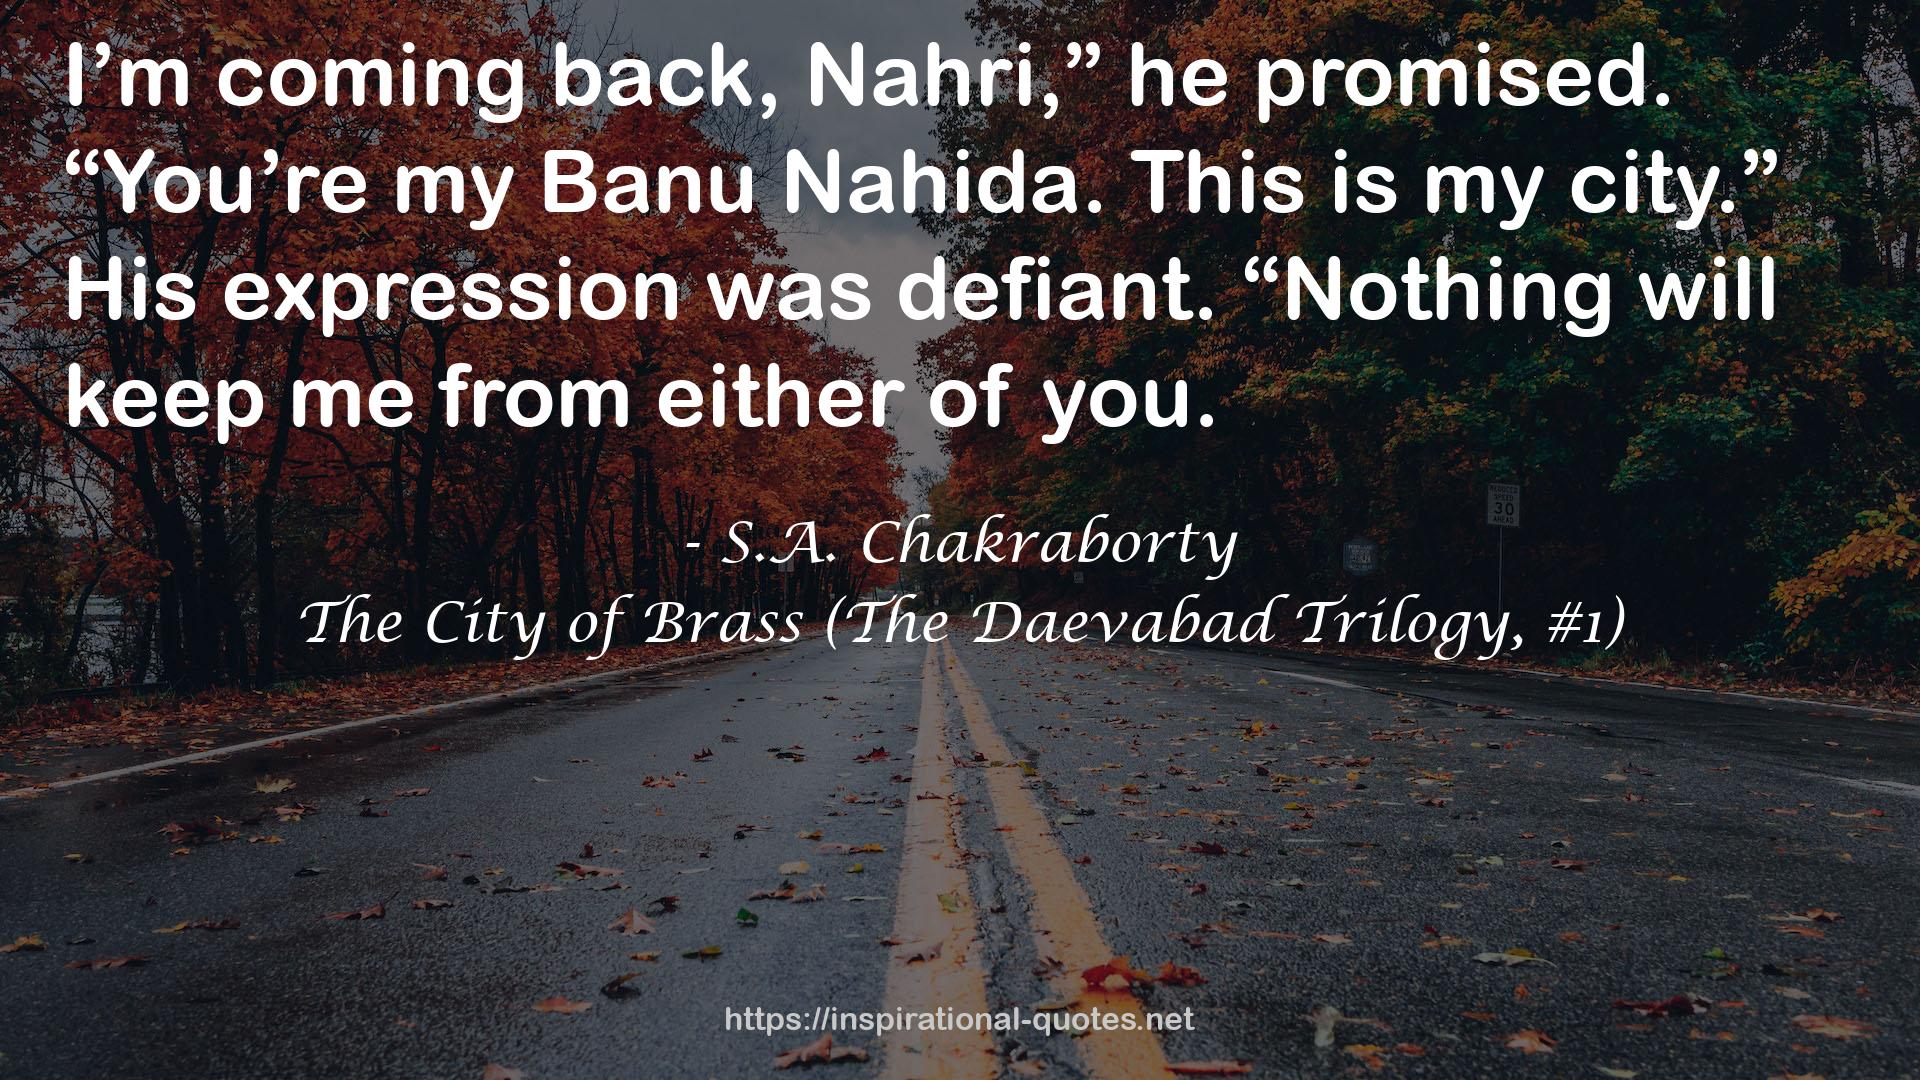 S.A. Chakraborty QUOTES